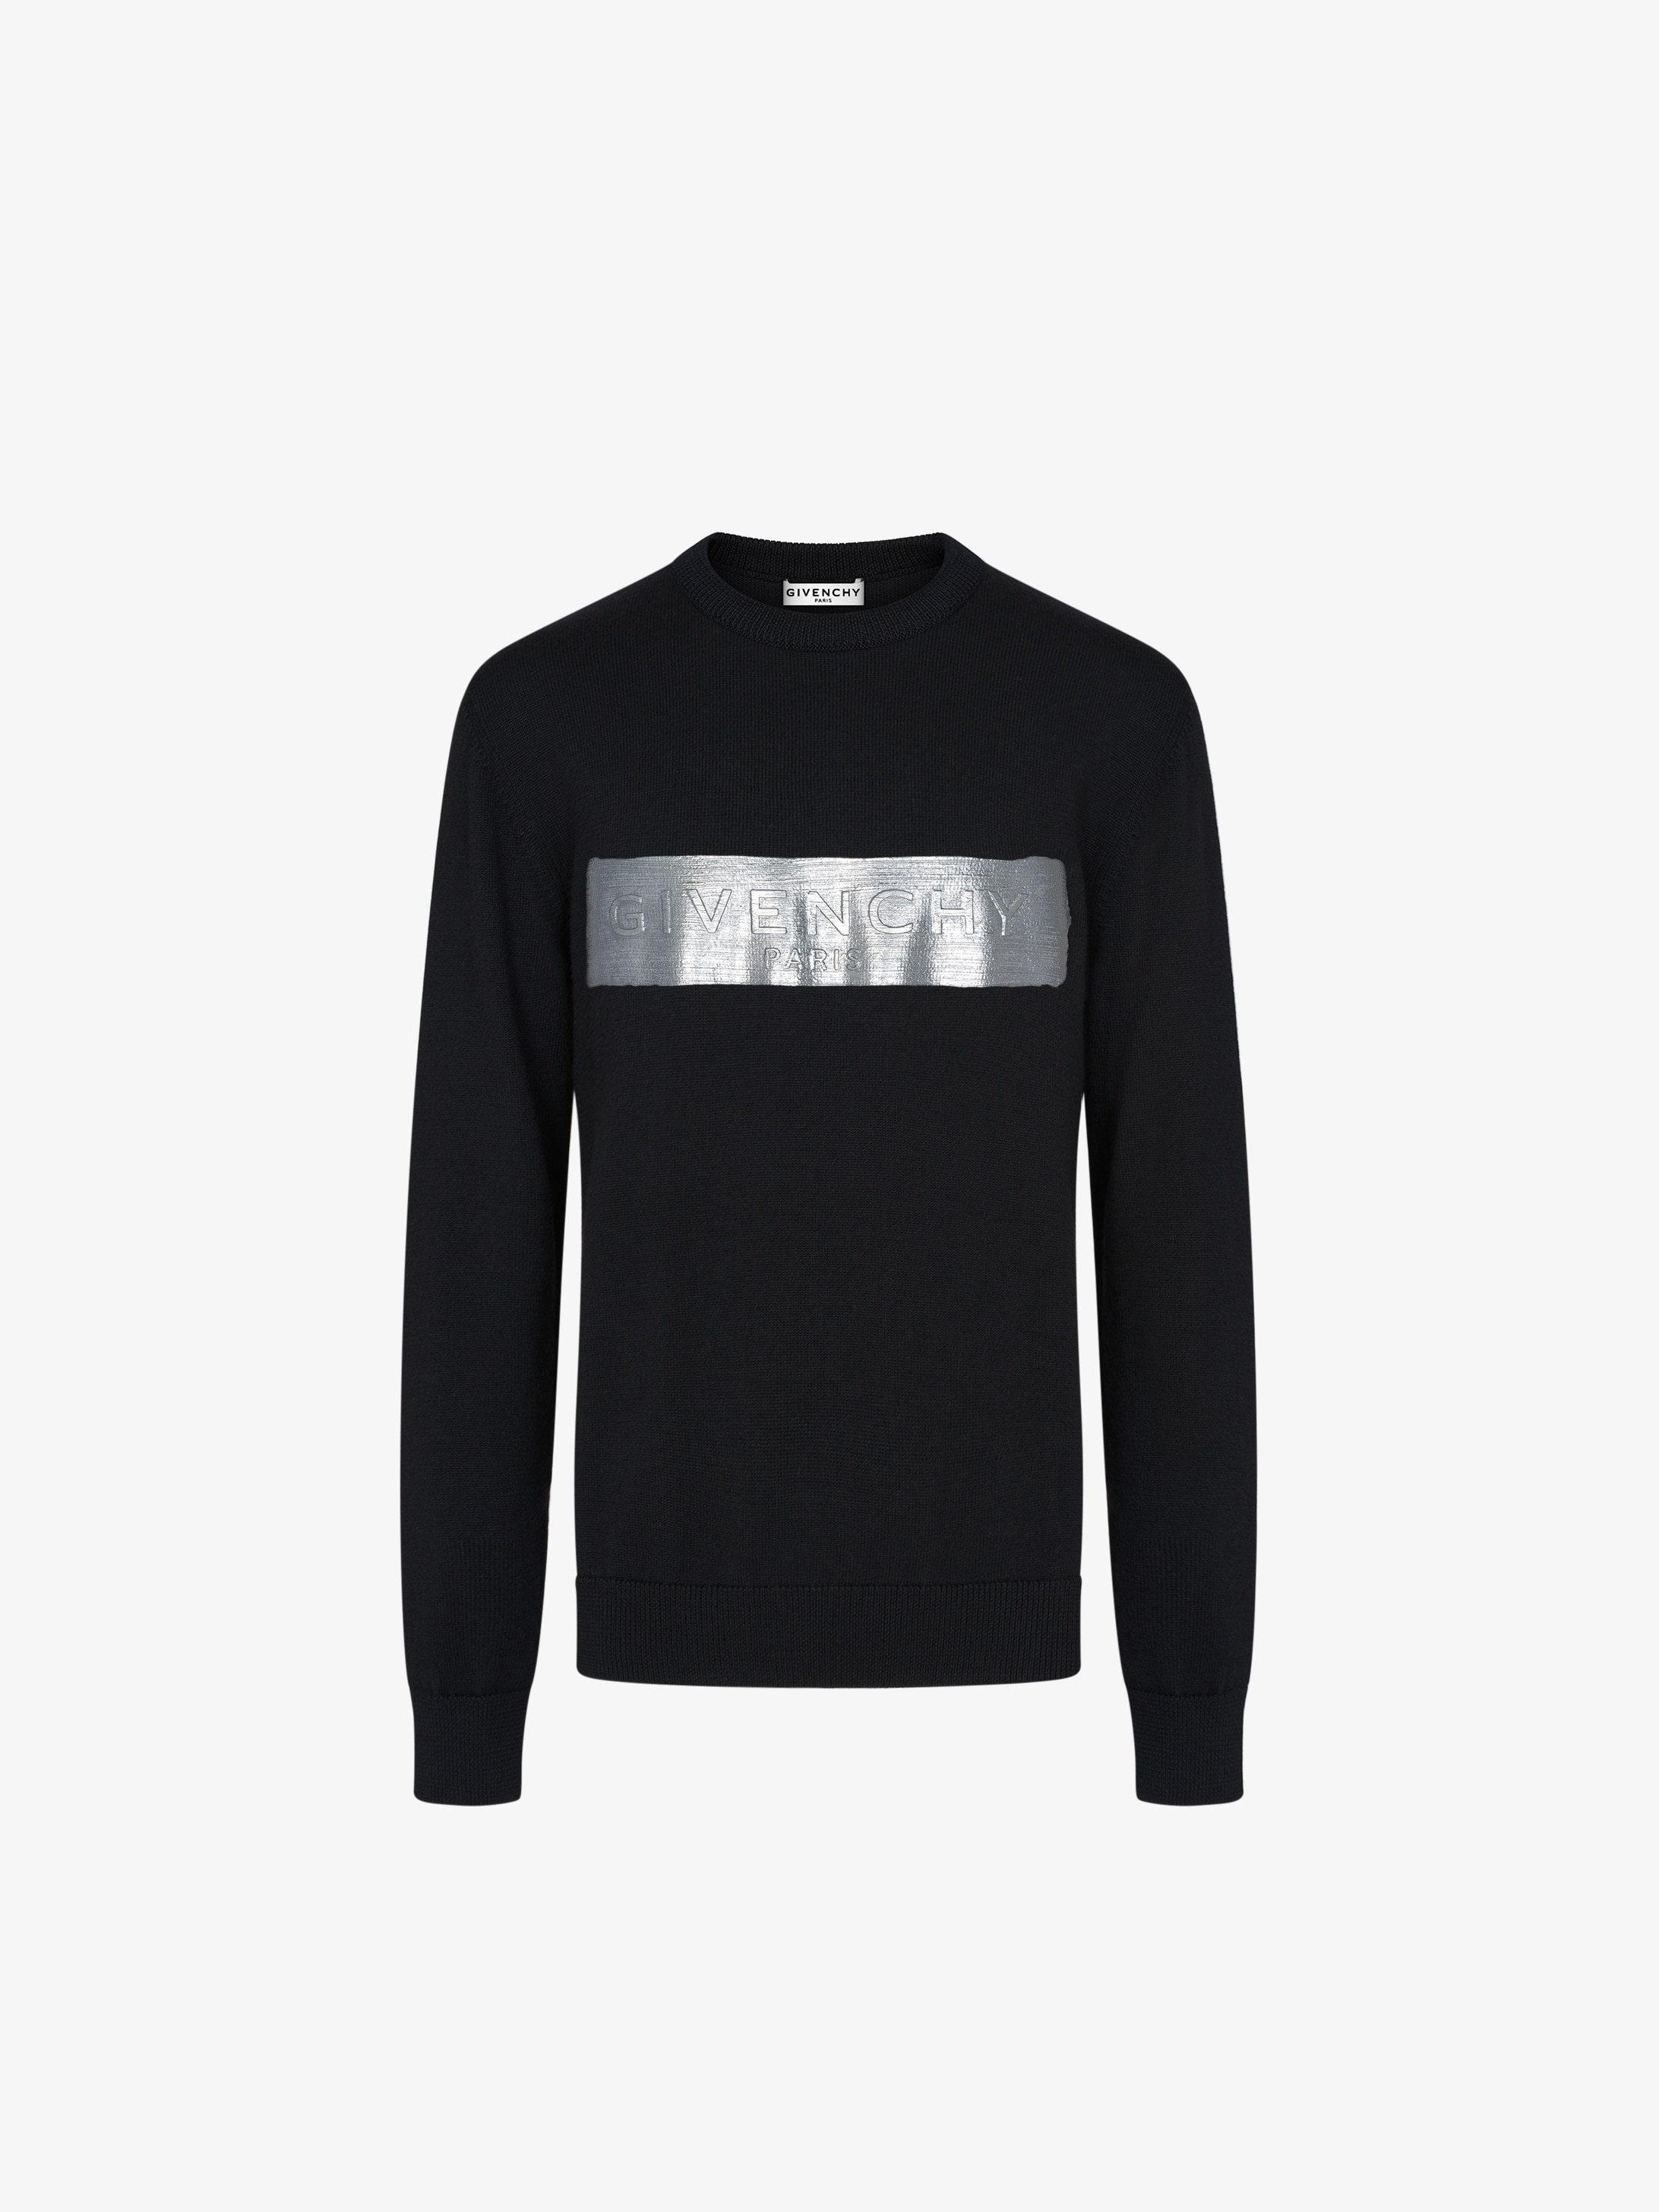 GIVENCHY sweater in wool with latex band | GIVENCHY Paris